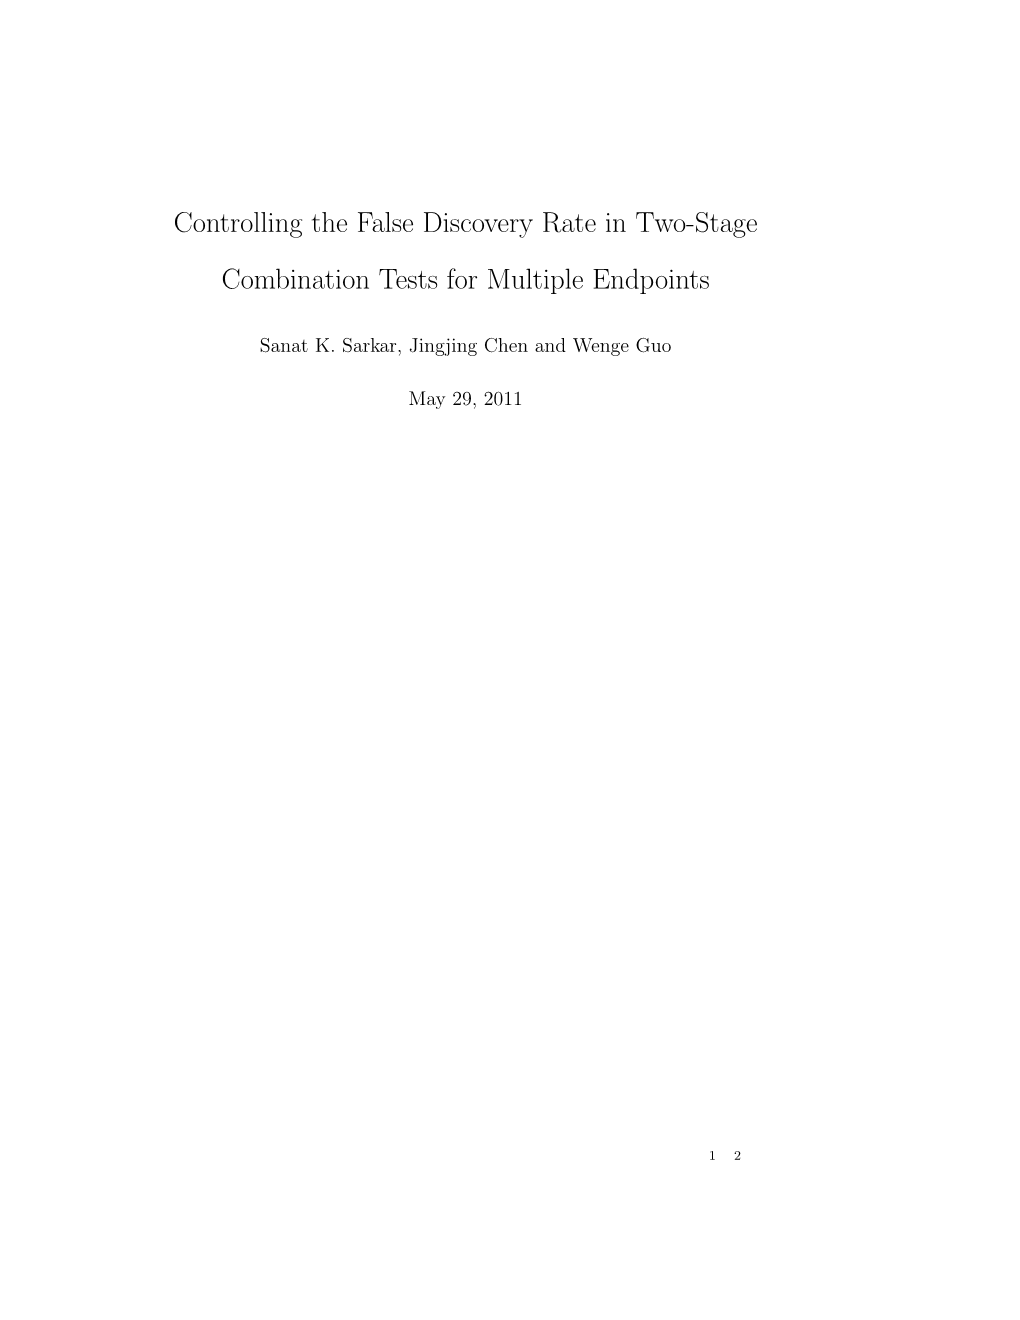 Controlling the False Discovery Rate in Two-Stage Combination Tests for Multiple Endpoints